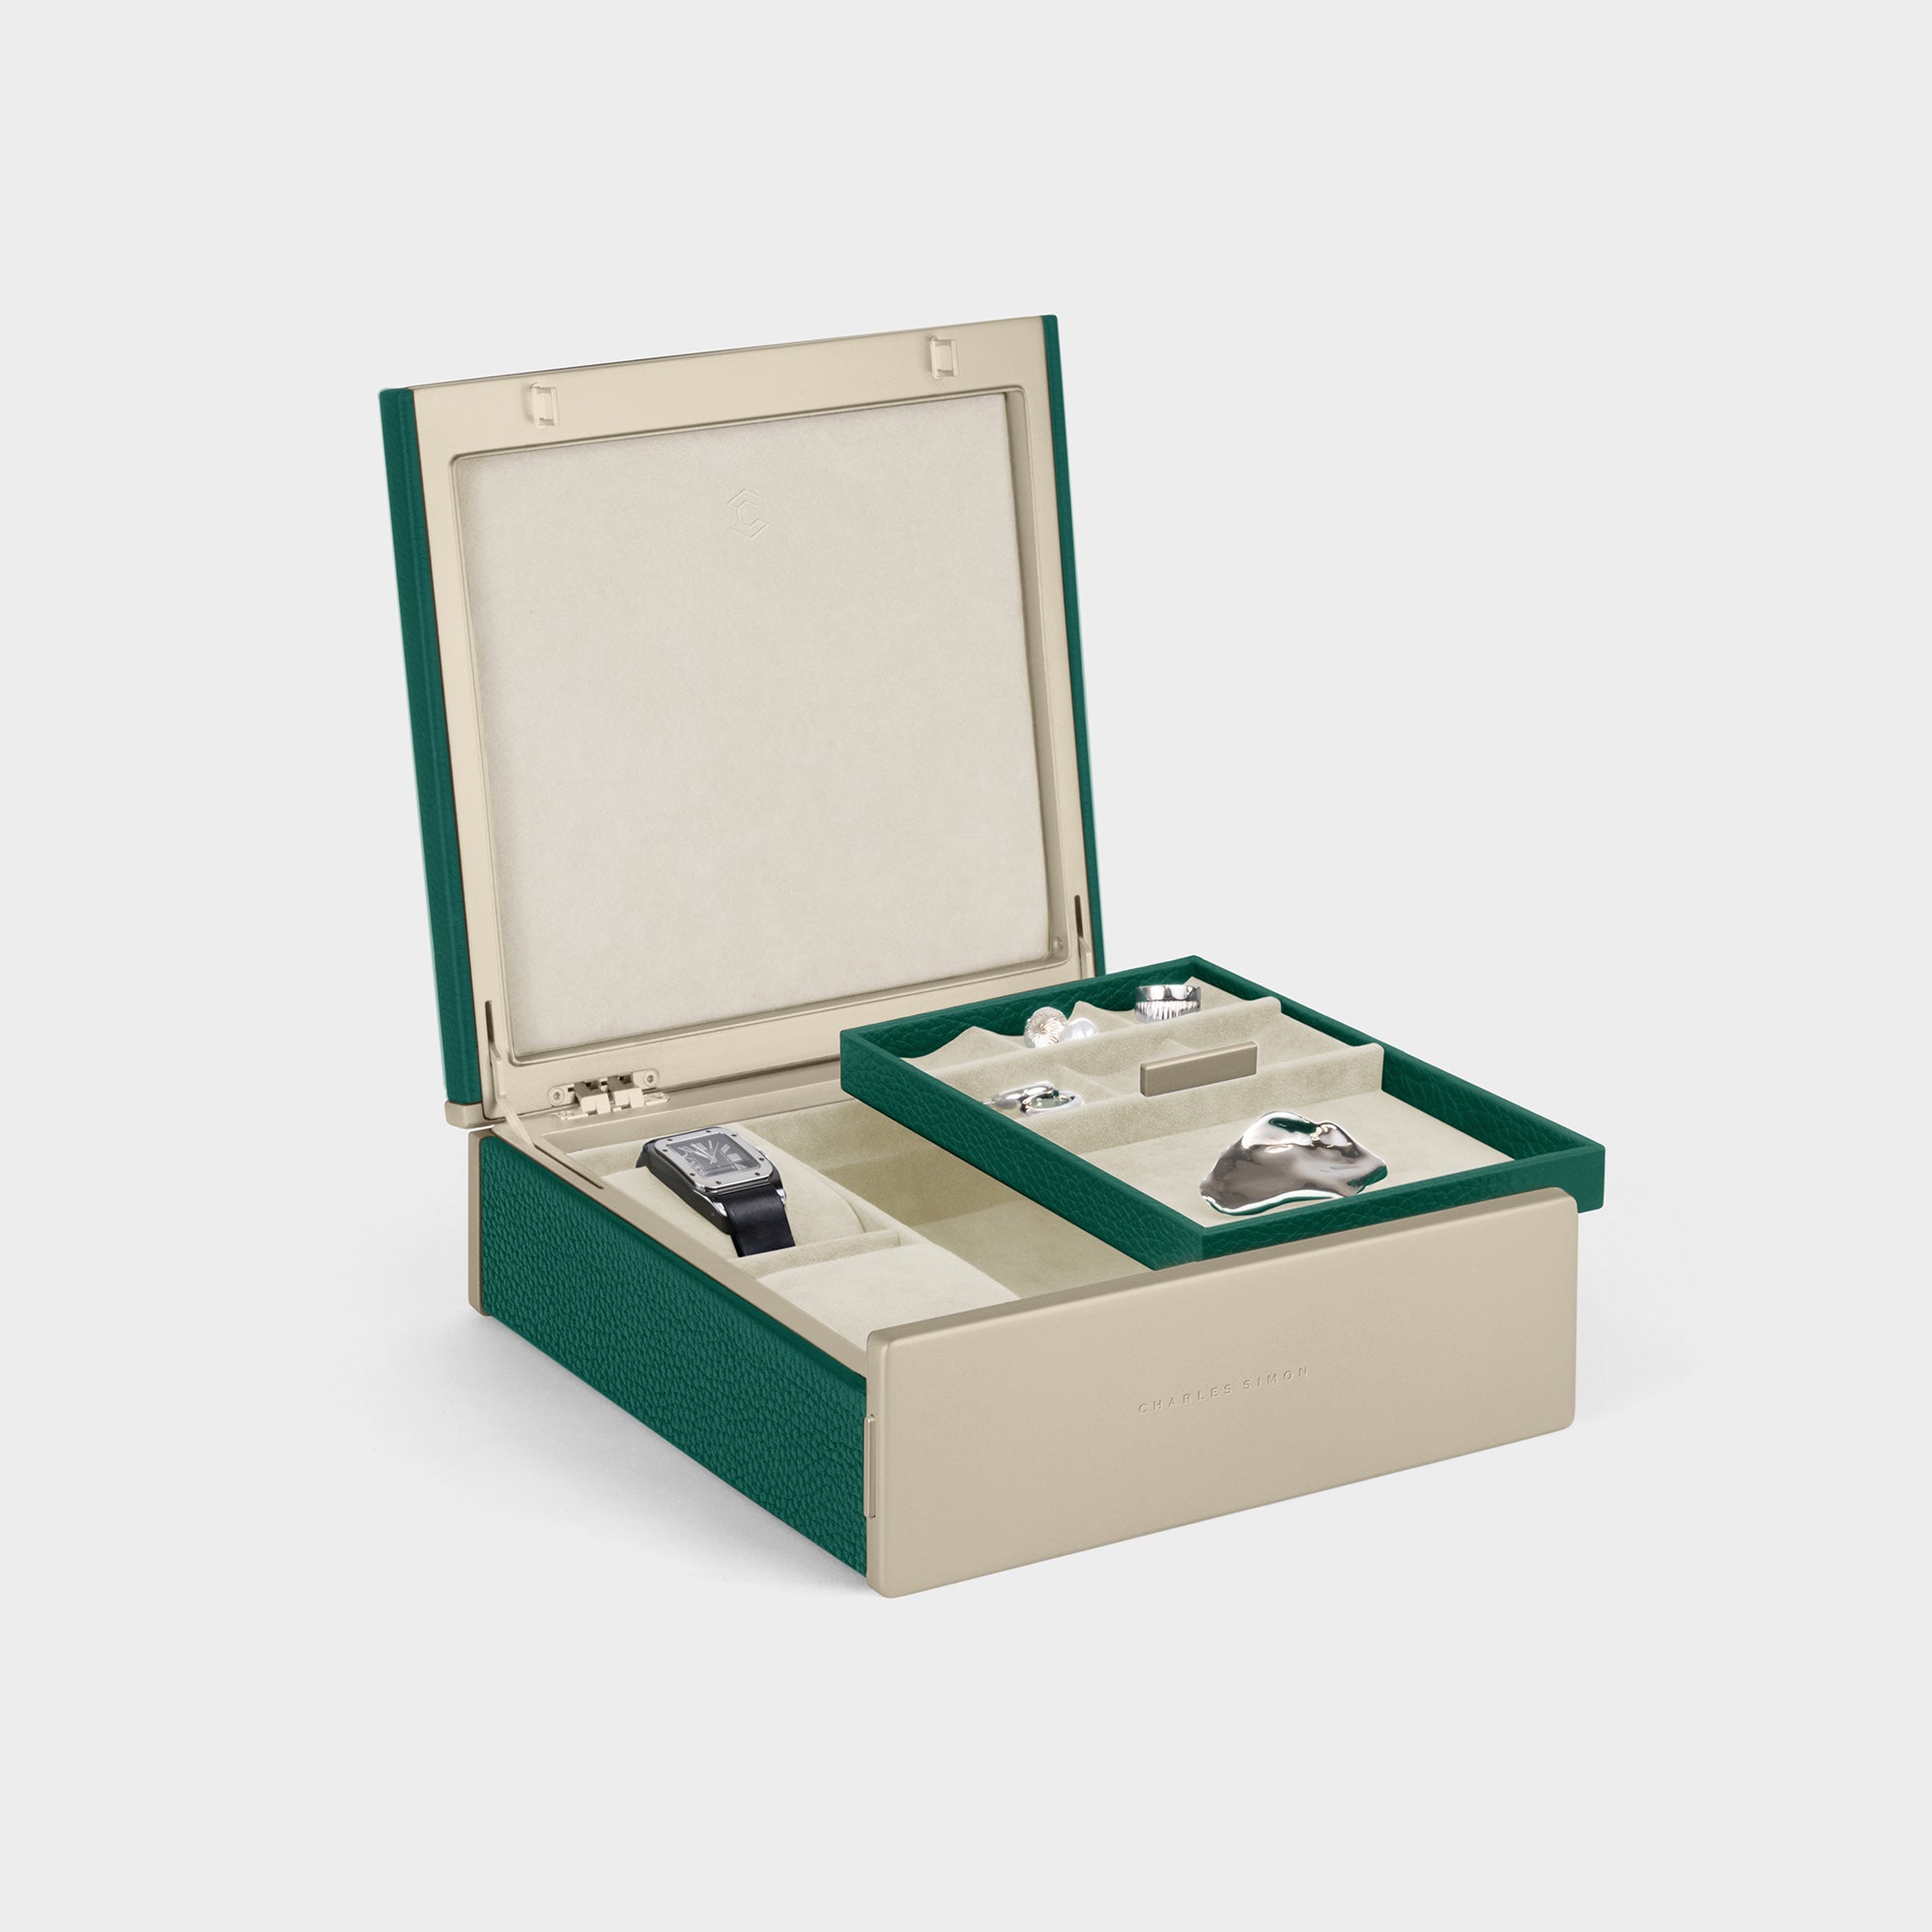 Product photo of open Taylor 2 Watch and Jewelry box in gold, emerald leather and eggshell interior., featuring the convenient removable jewelry tray designed to organize a collection of jewelry 